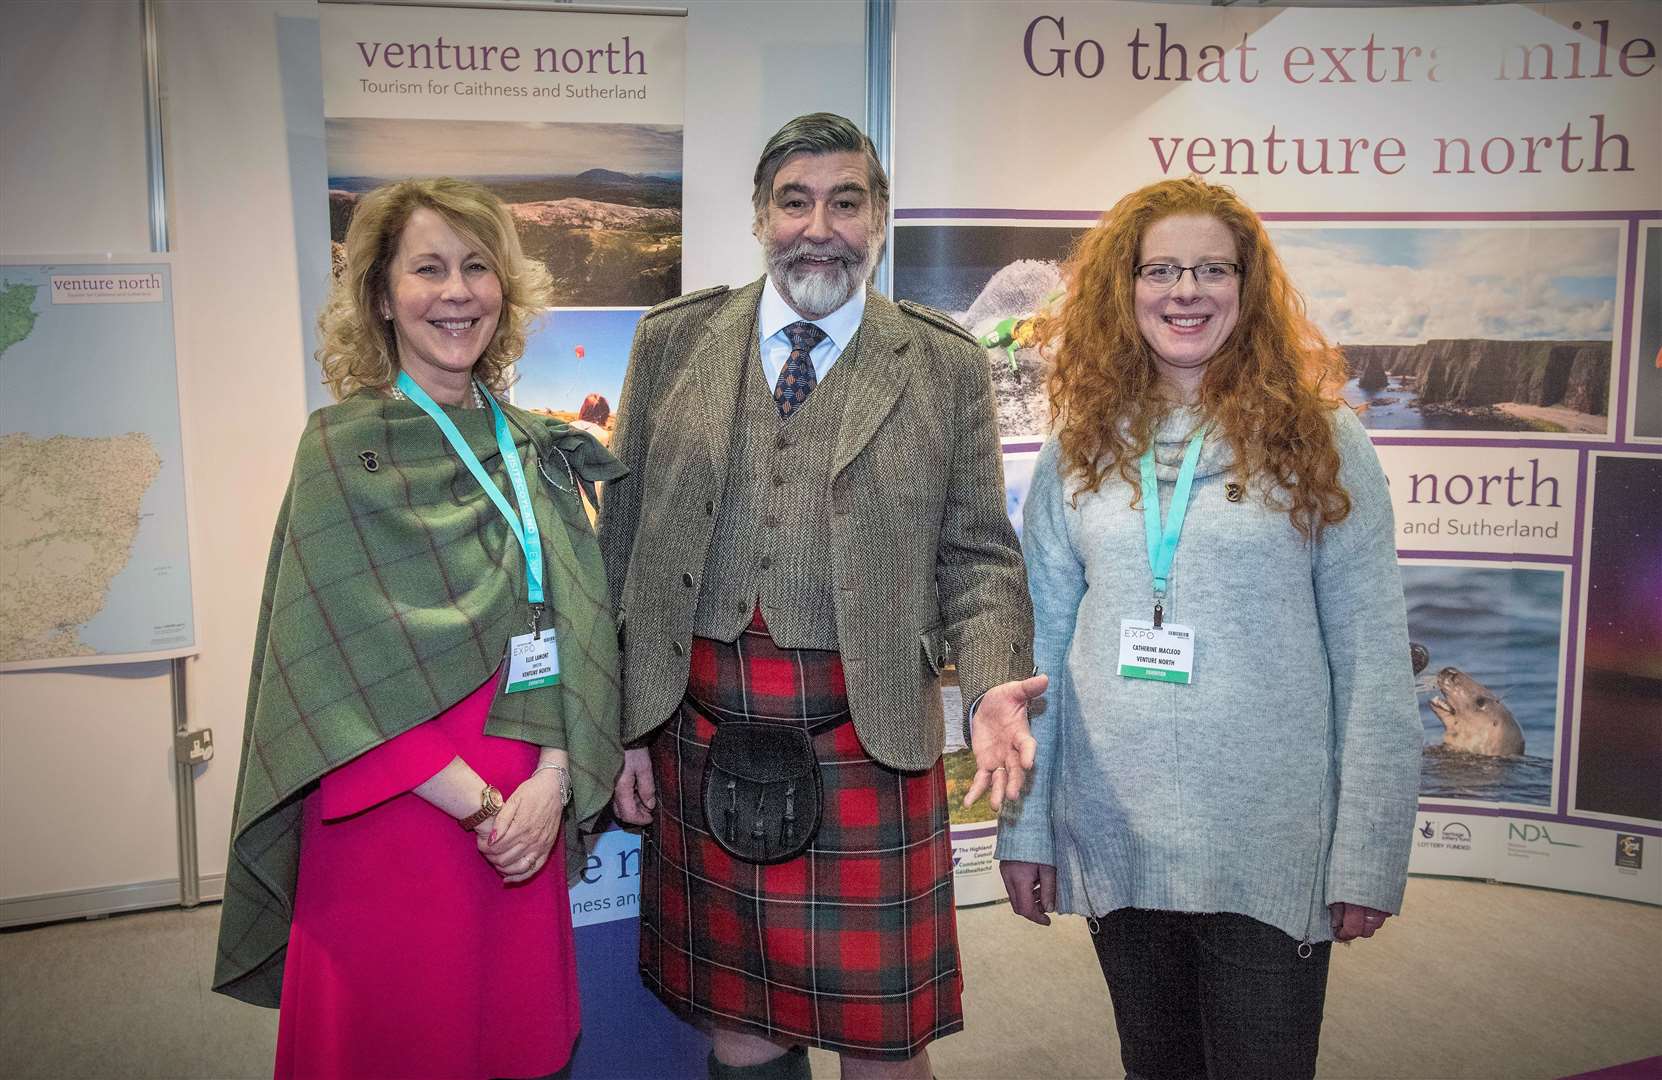 Ellie Lamont (left), vice-chairperson of Venture North, with the chair of VisitScotland, Lord Thurso, and Catherine Macleod, chairperson of Venture North. Picture: Chris Watt